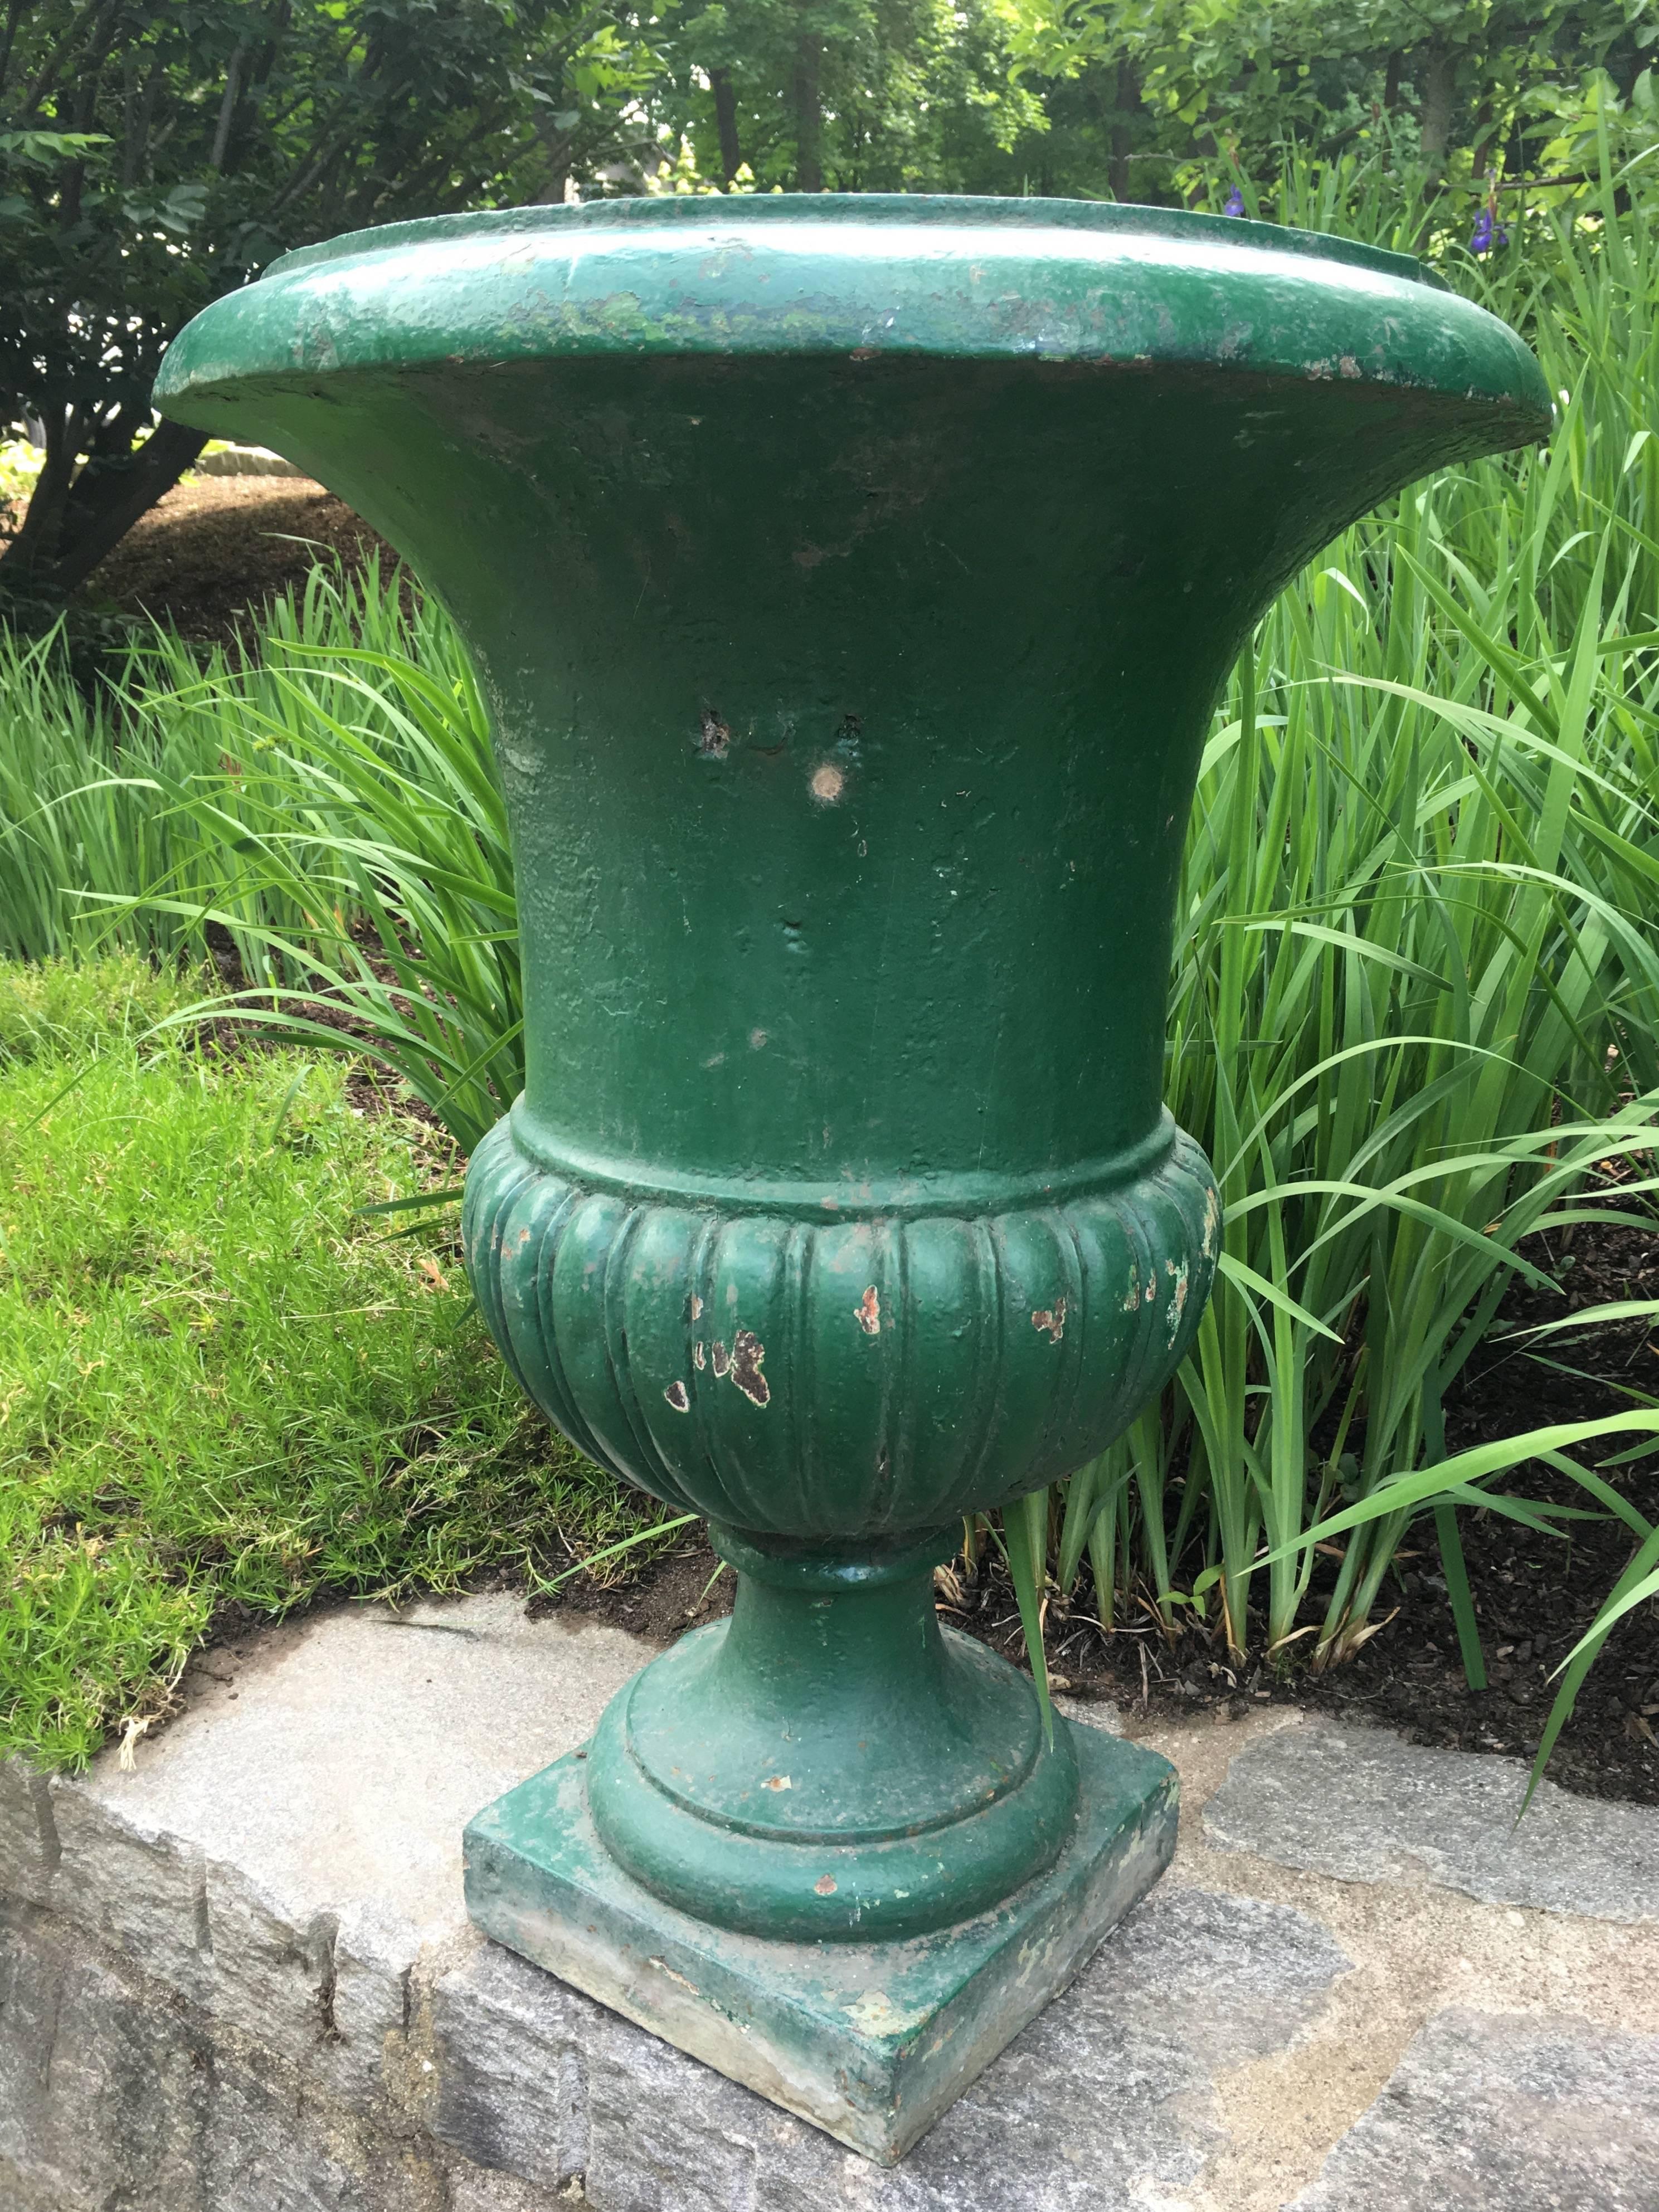 This is a gorgeous and early French cast iron campana urn with a plain, everted rim and semi-lobed body. In old green paint, it would make a real statement beside your front door potted up with a profuse arrangement of annuals or wavy grasses. It is